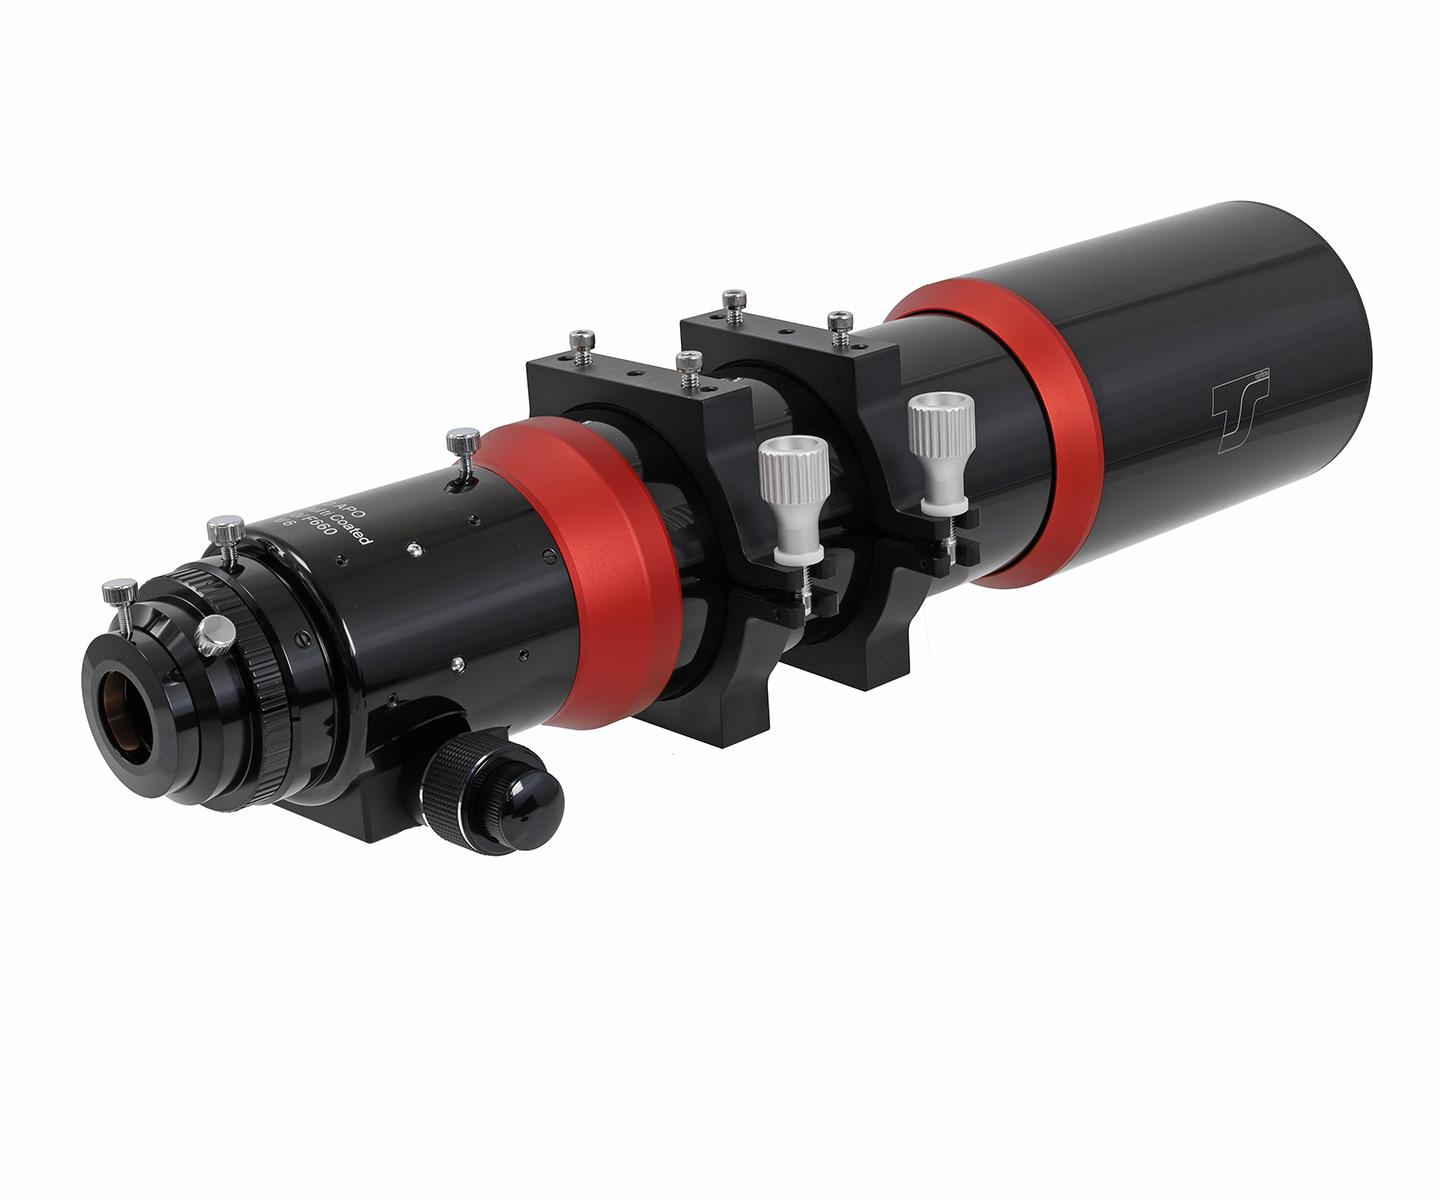  The fast 110 mm ED APO offers good chromatic correction through two special glasses, it is designed for observation and astrophotography. [EN] 